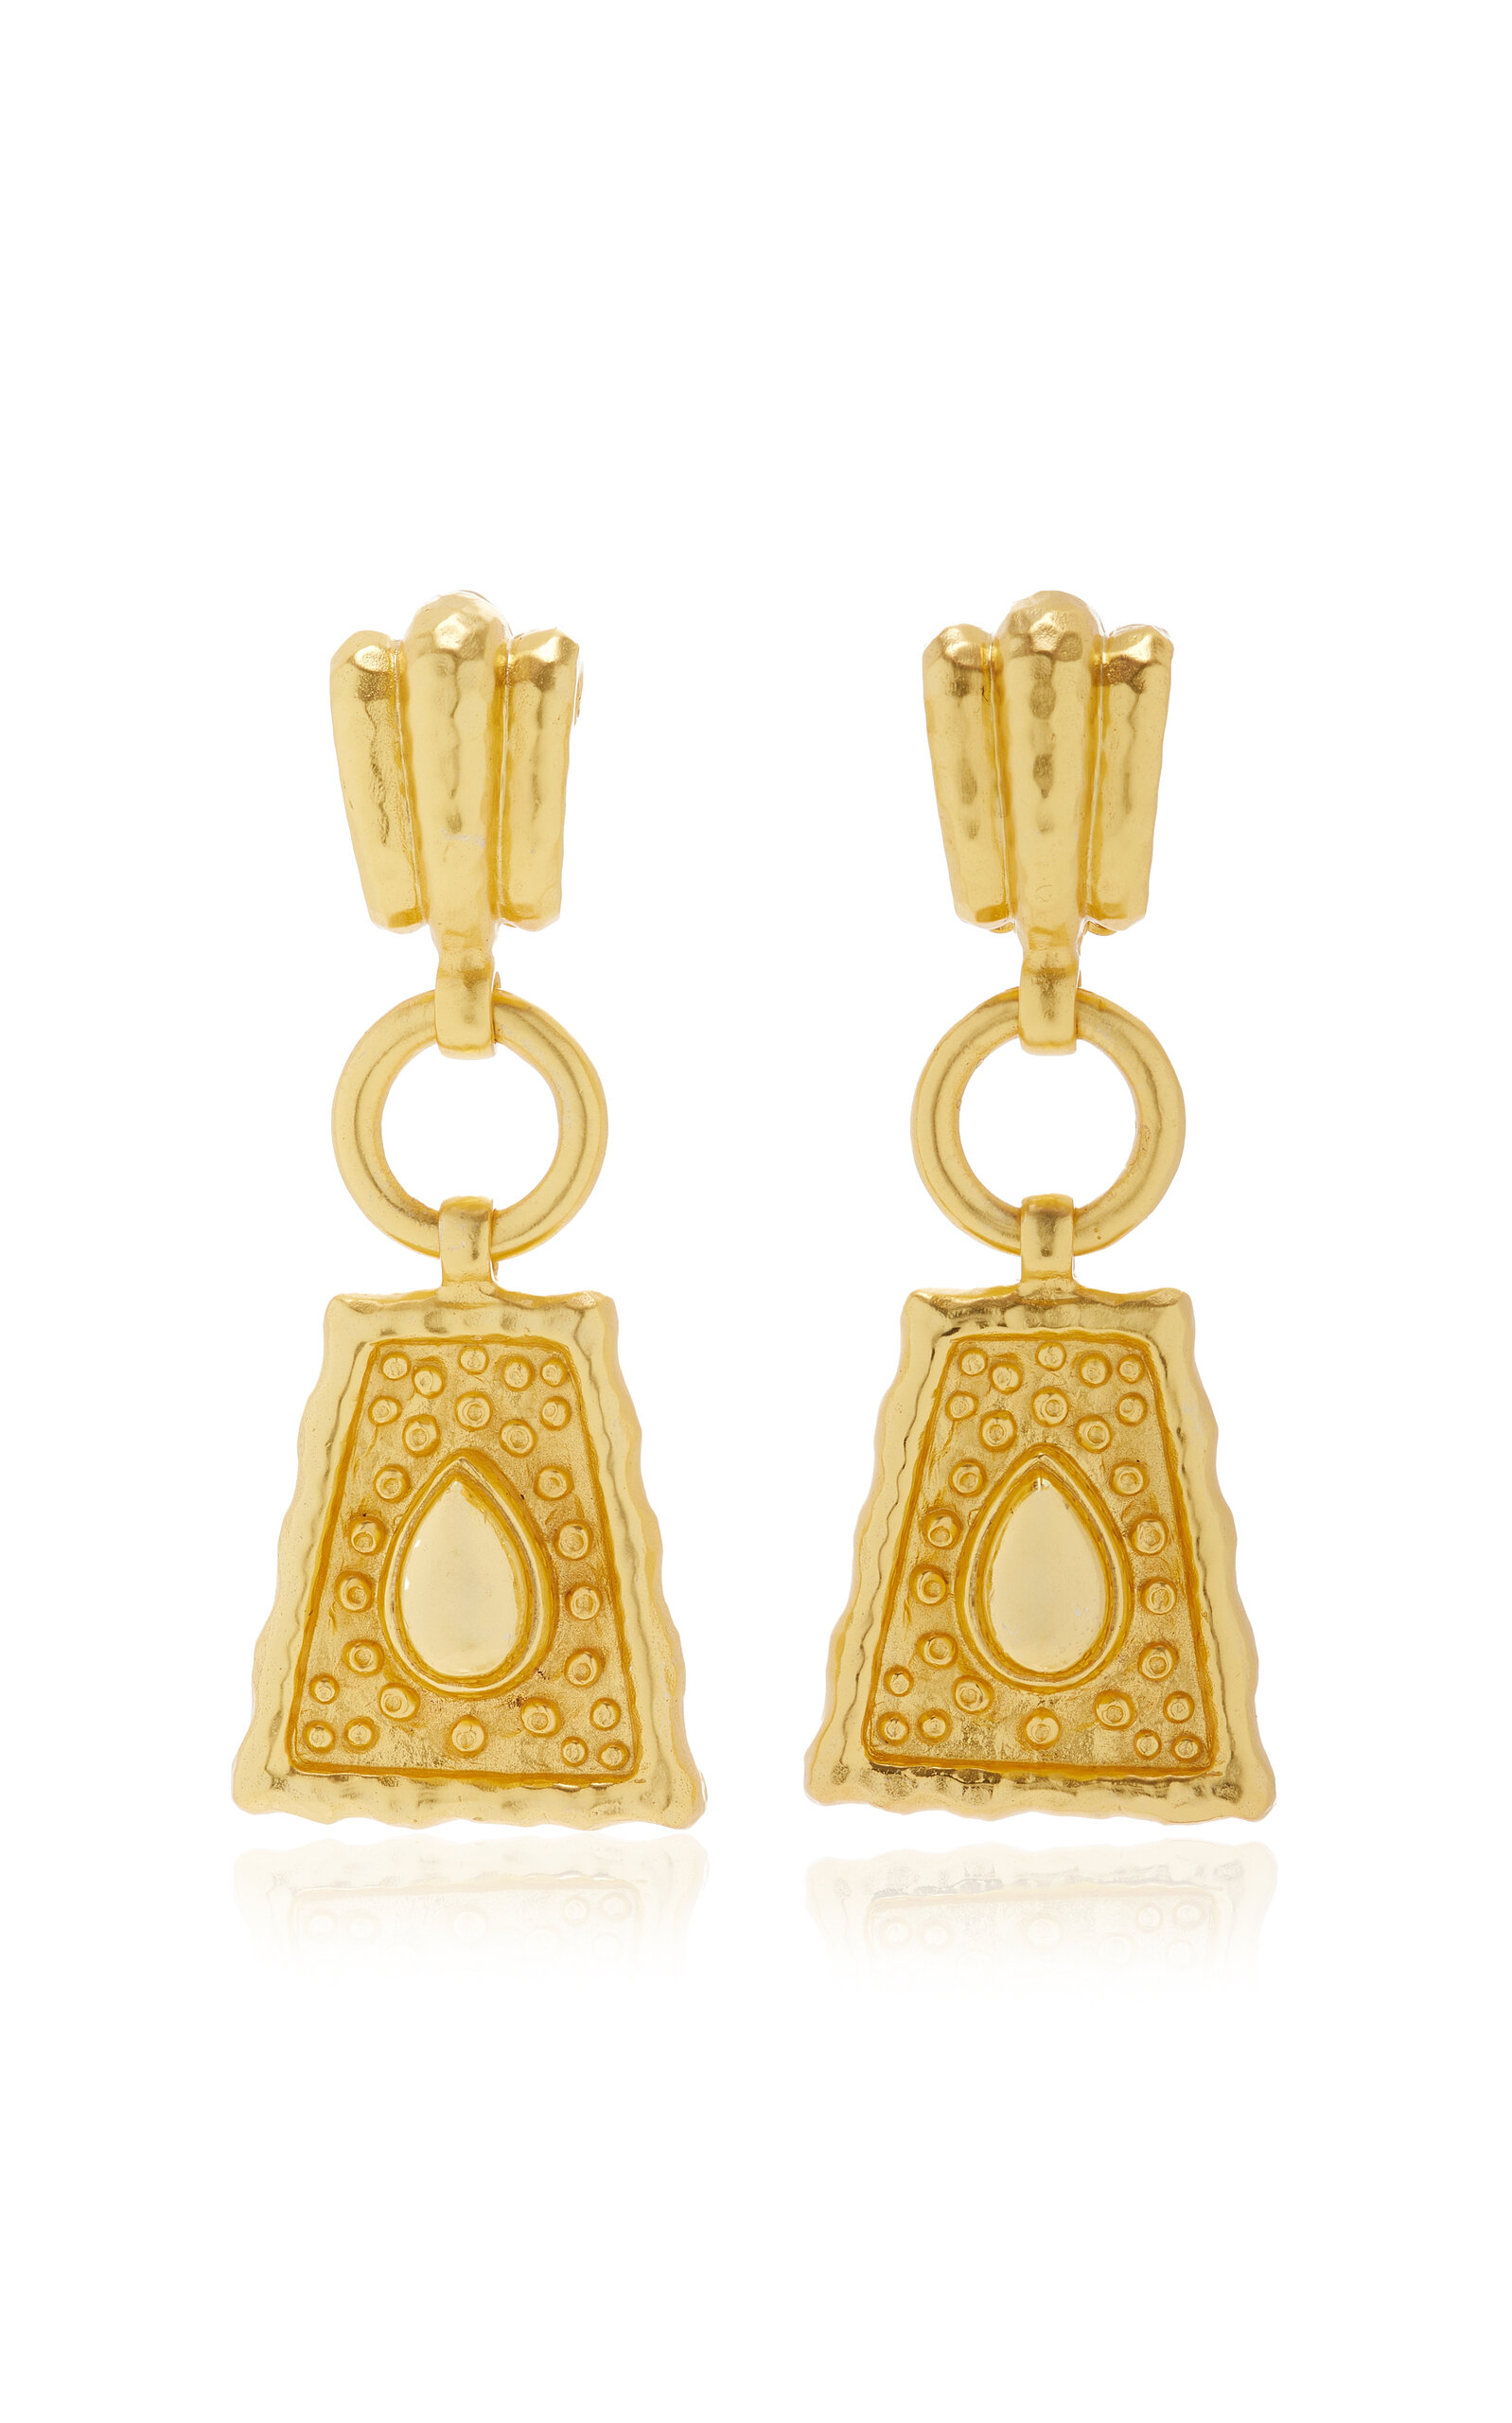 Mayan 24K Gold-Plated Earrings